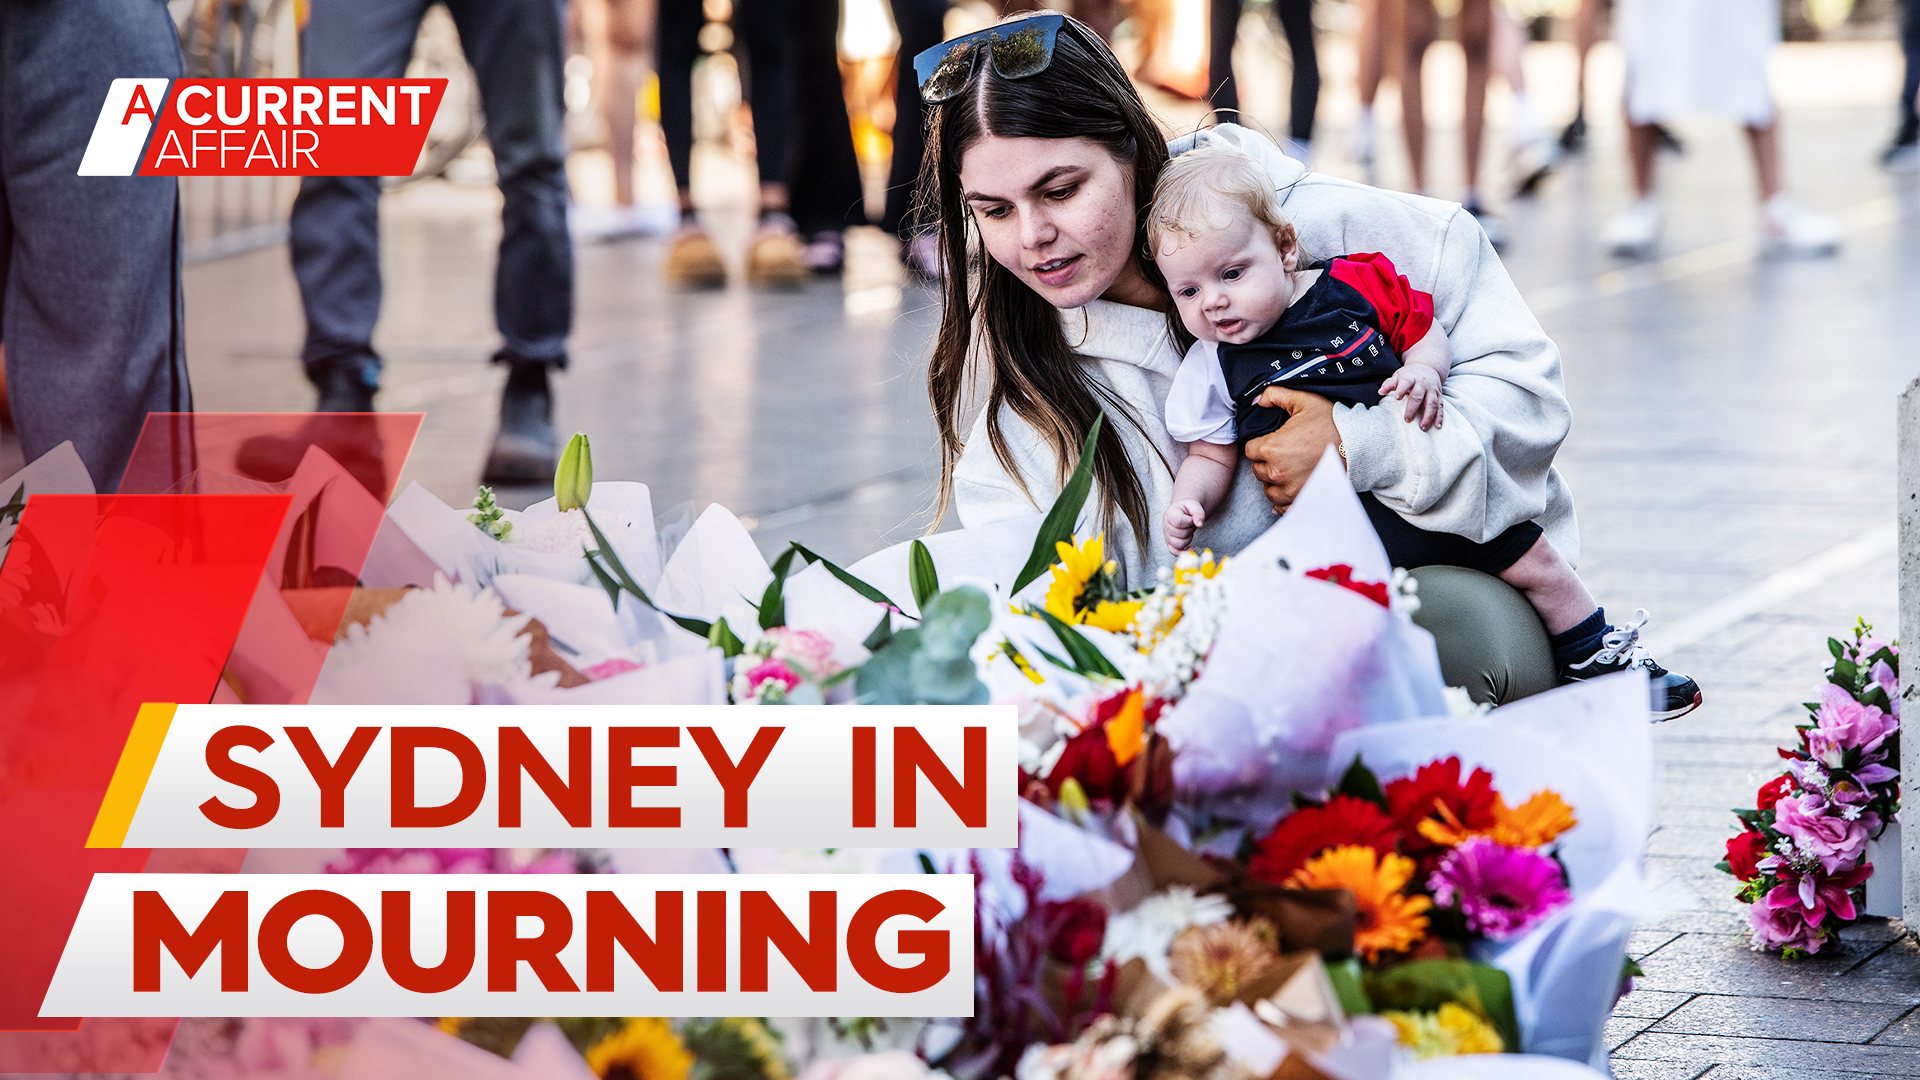 Bondi Junction awash with flowers as city mourns lives lost